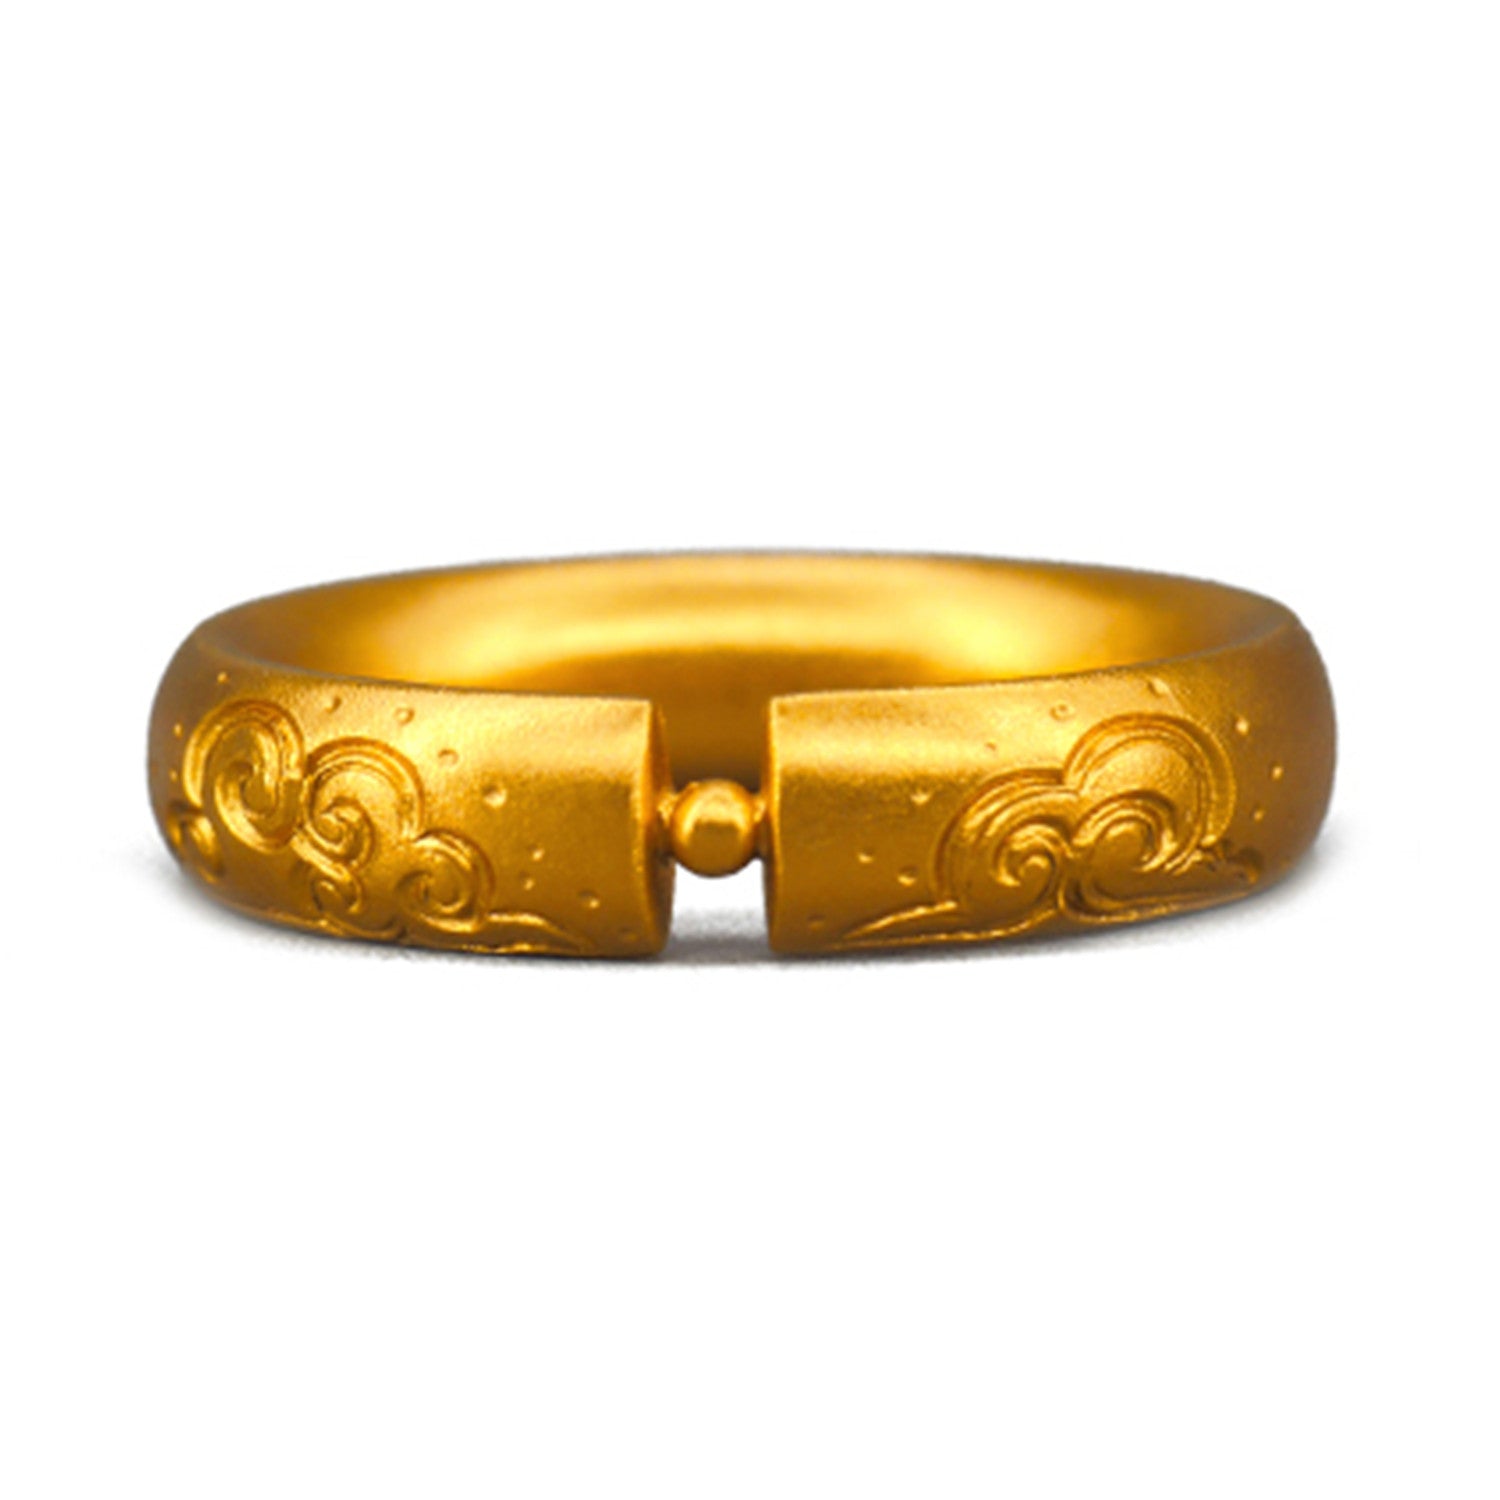 EVECOCO Full Gold Ring Hand Forging With Cloud Pattern,6mm Wide